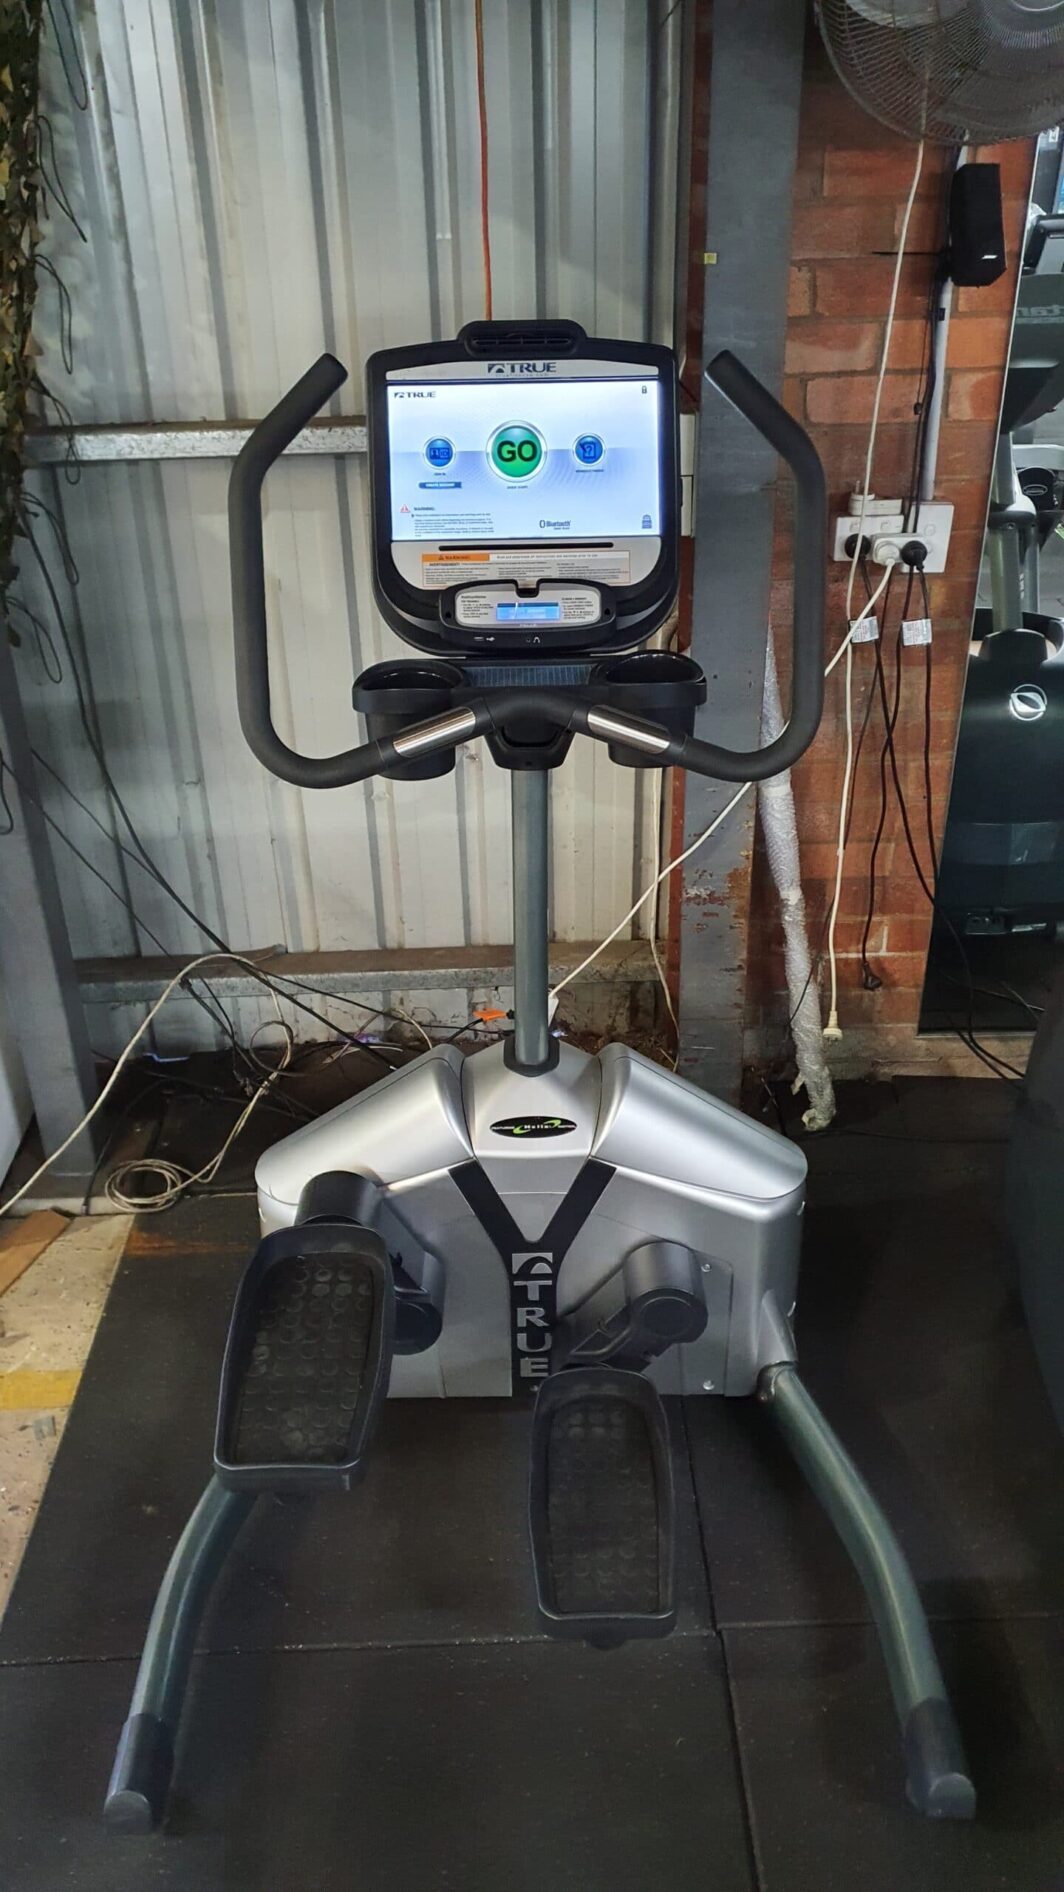 True Fitness TRAVERSE w/ Envision 16" LCD Touch Screen second gym equipment